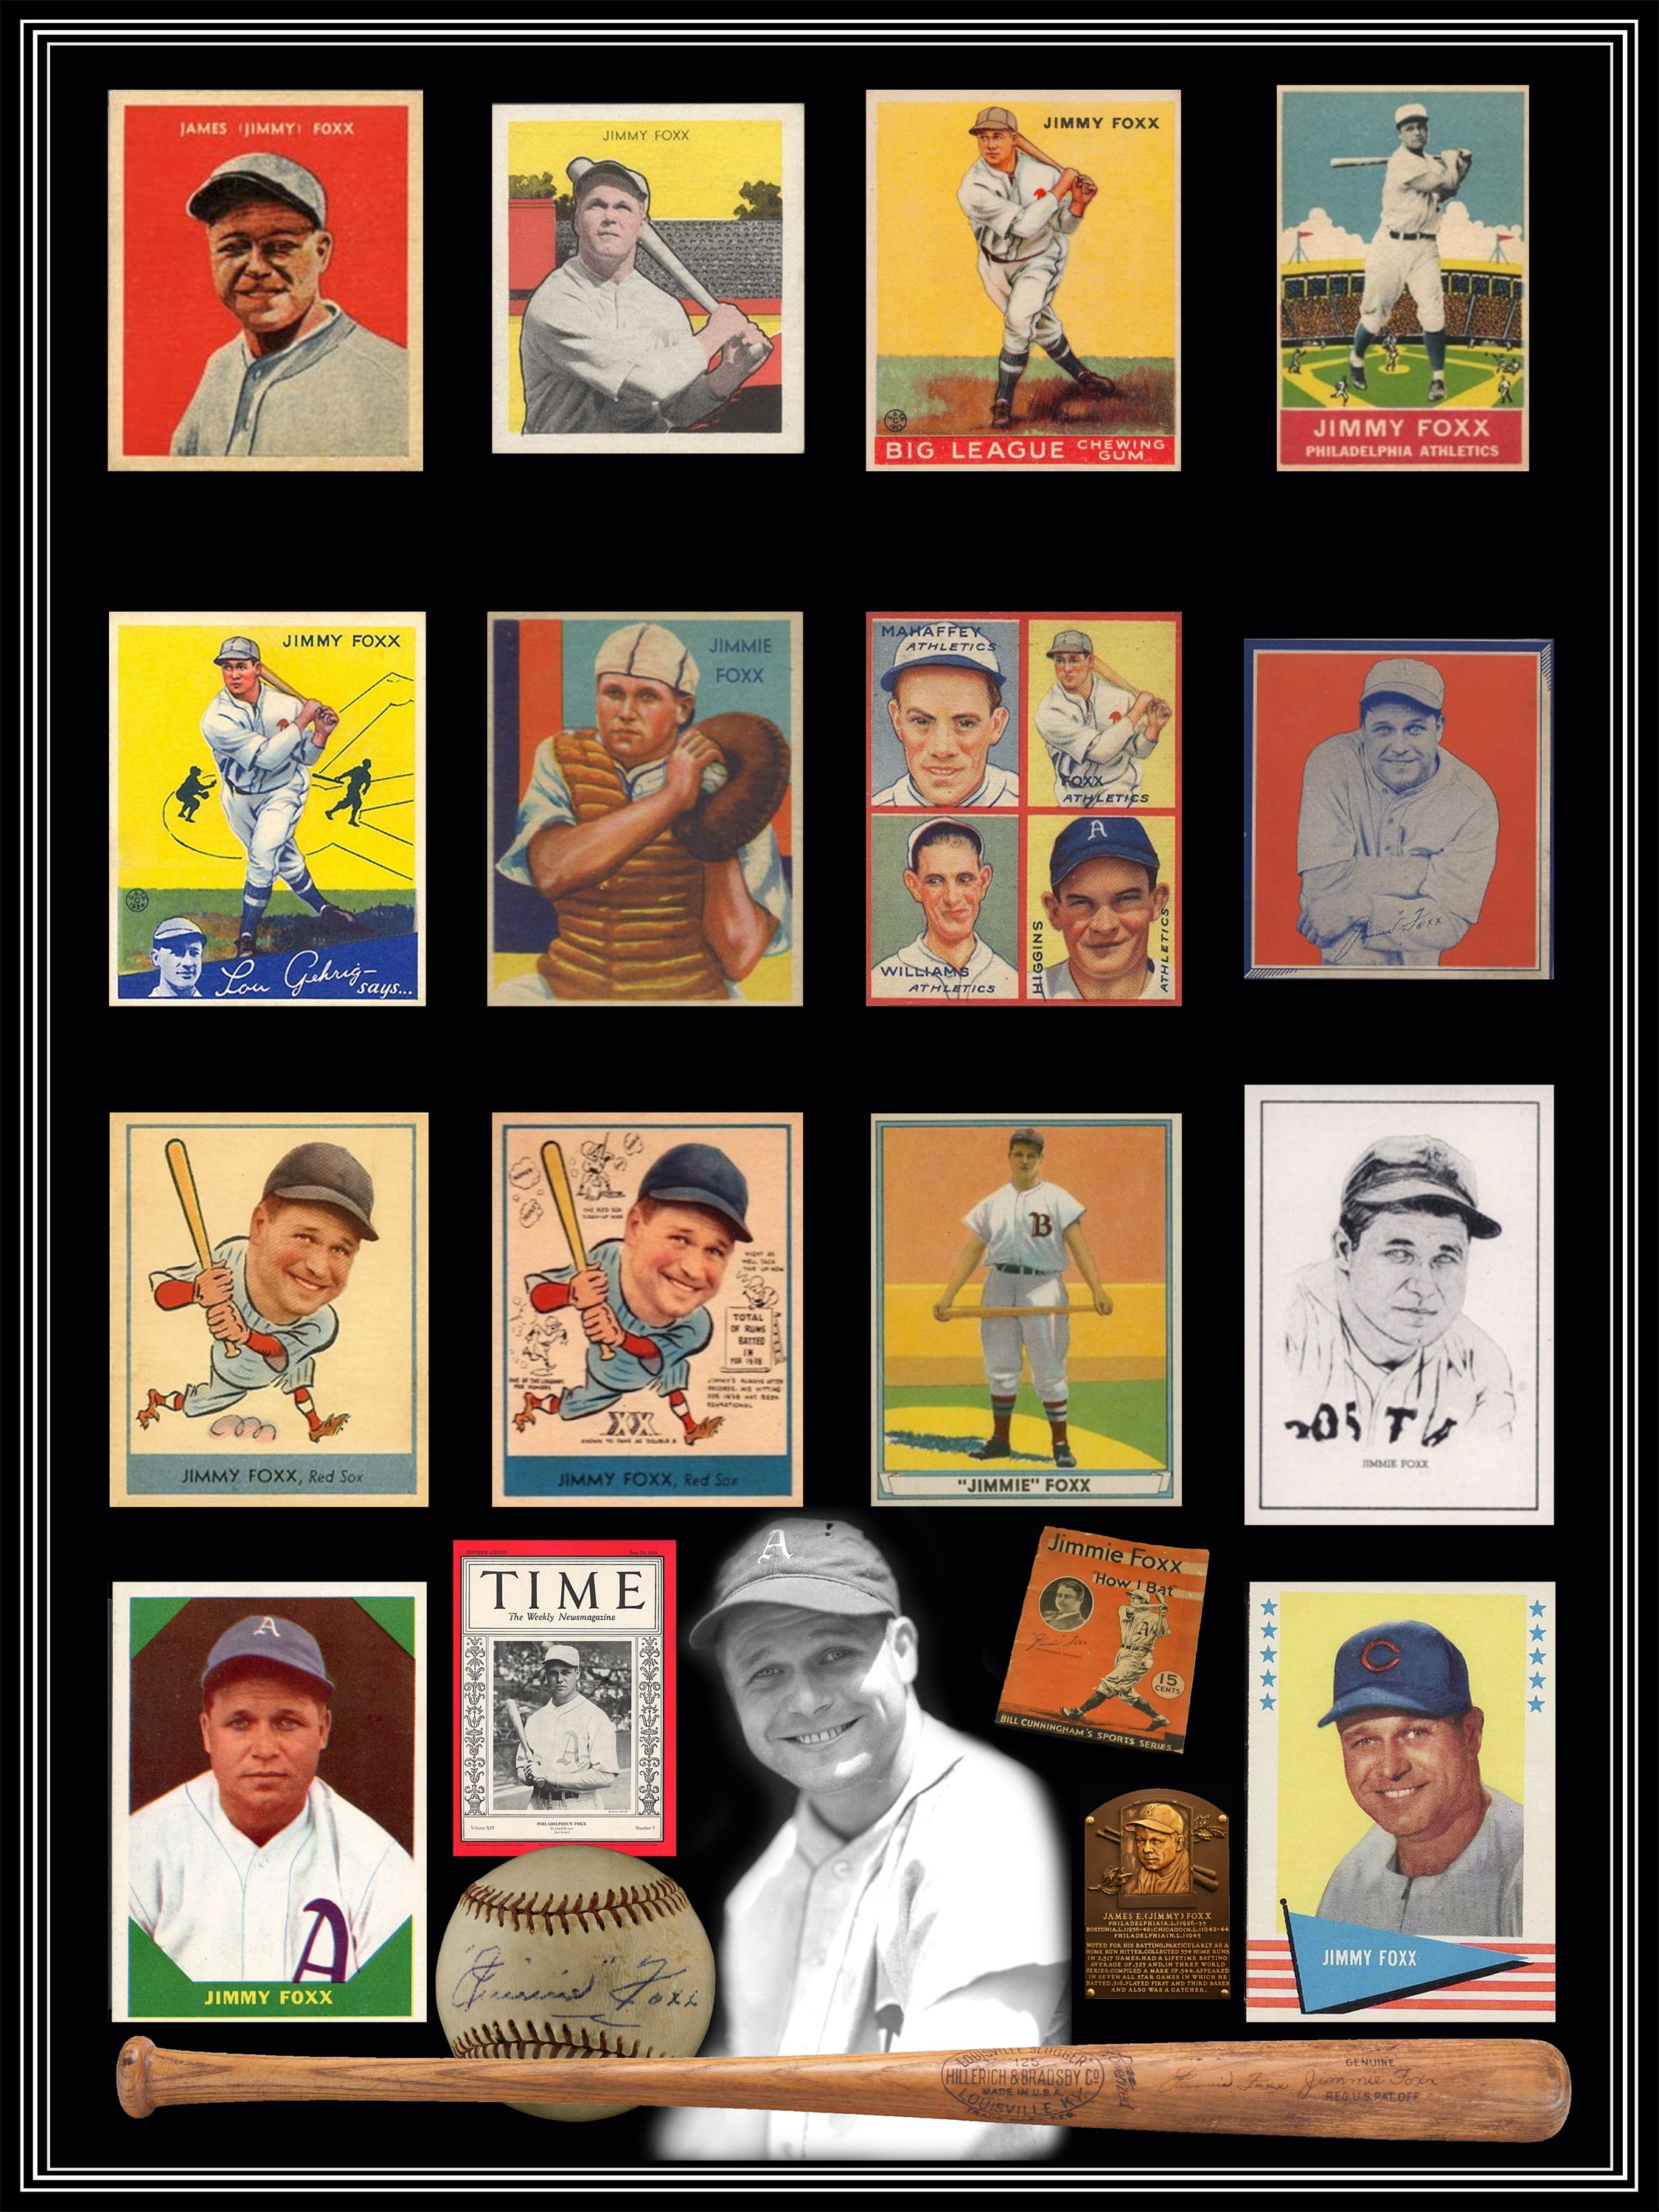 18x24 Full Color Jimmie Foxx Baseball Card Poster 